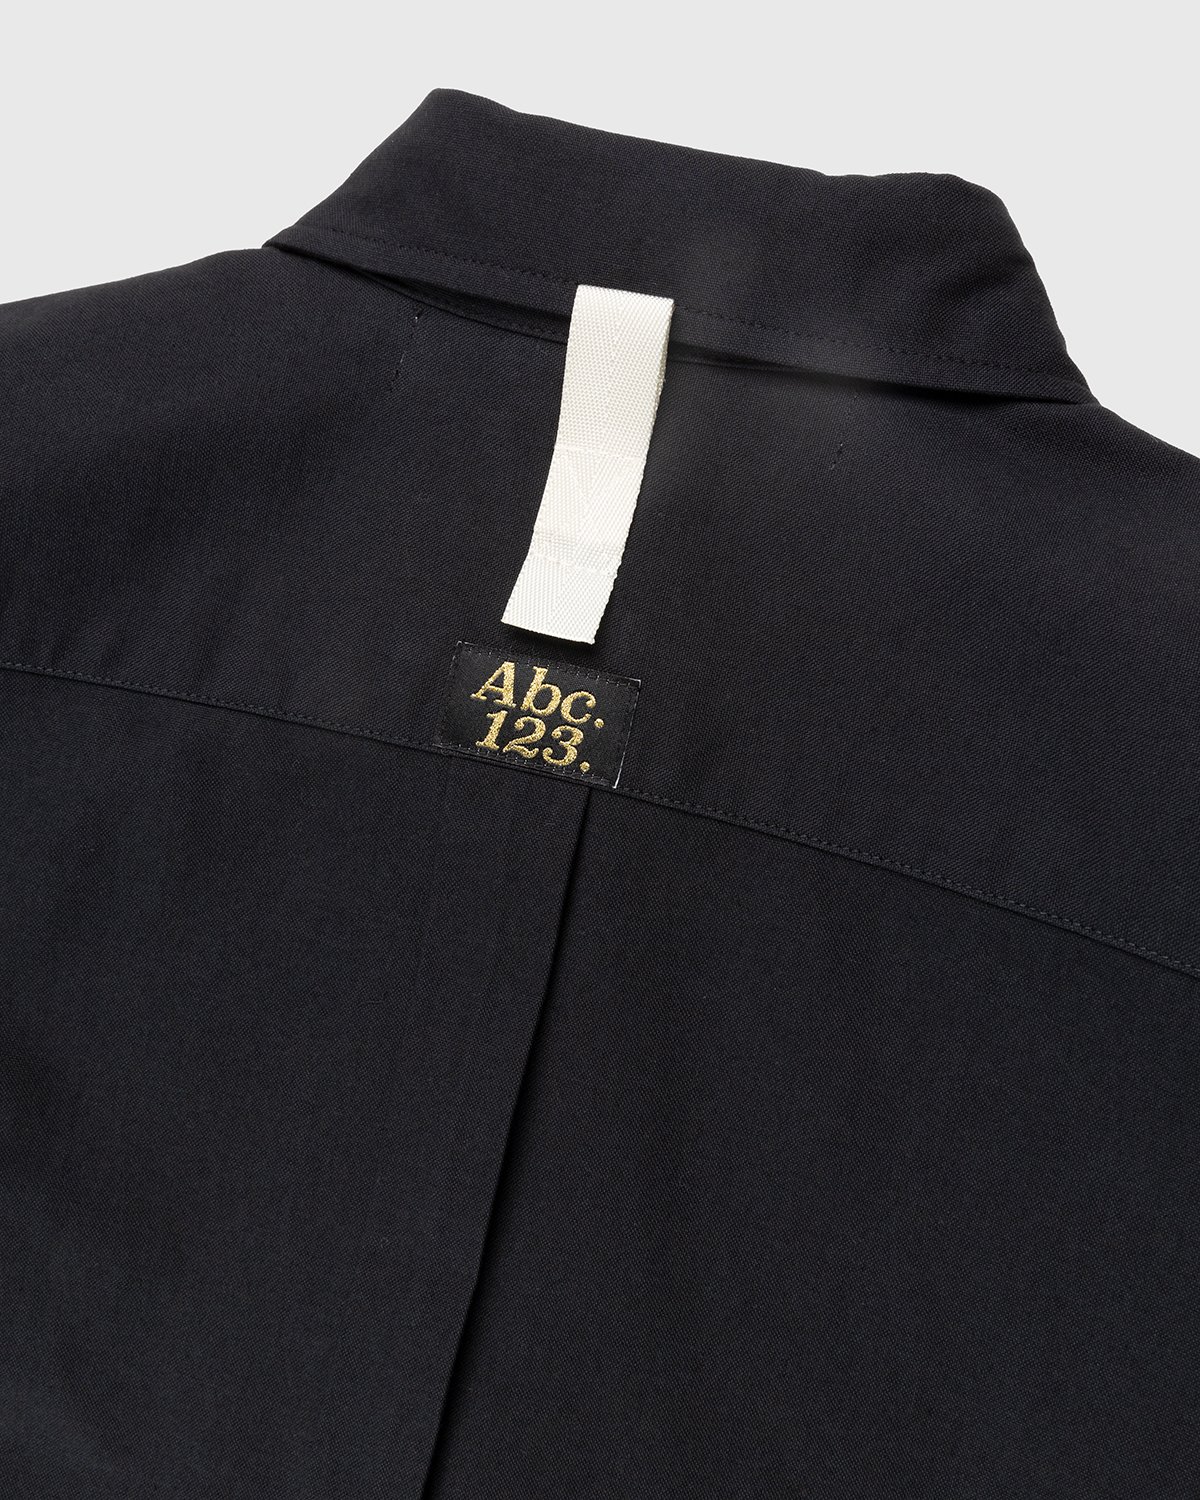 Abc. - Oxford Woven Shirt Anthracite - Clothing - Black - Image 5